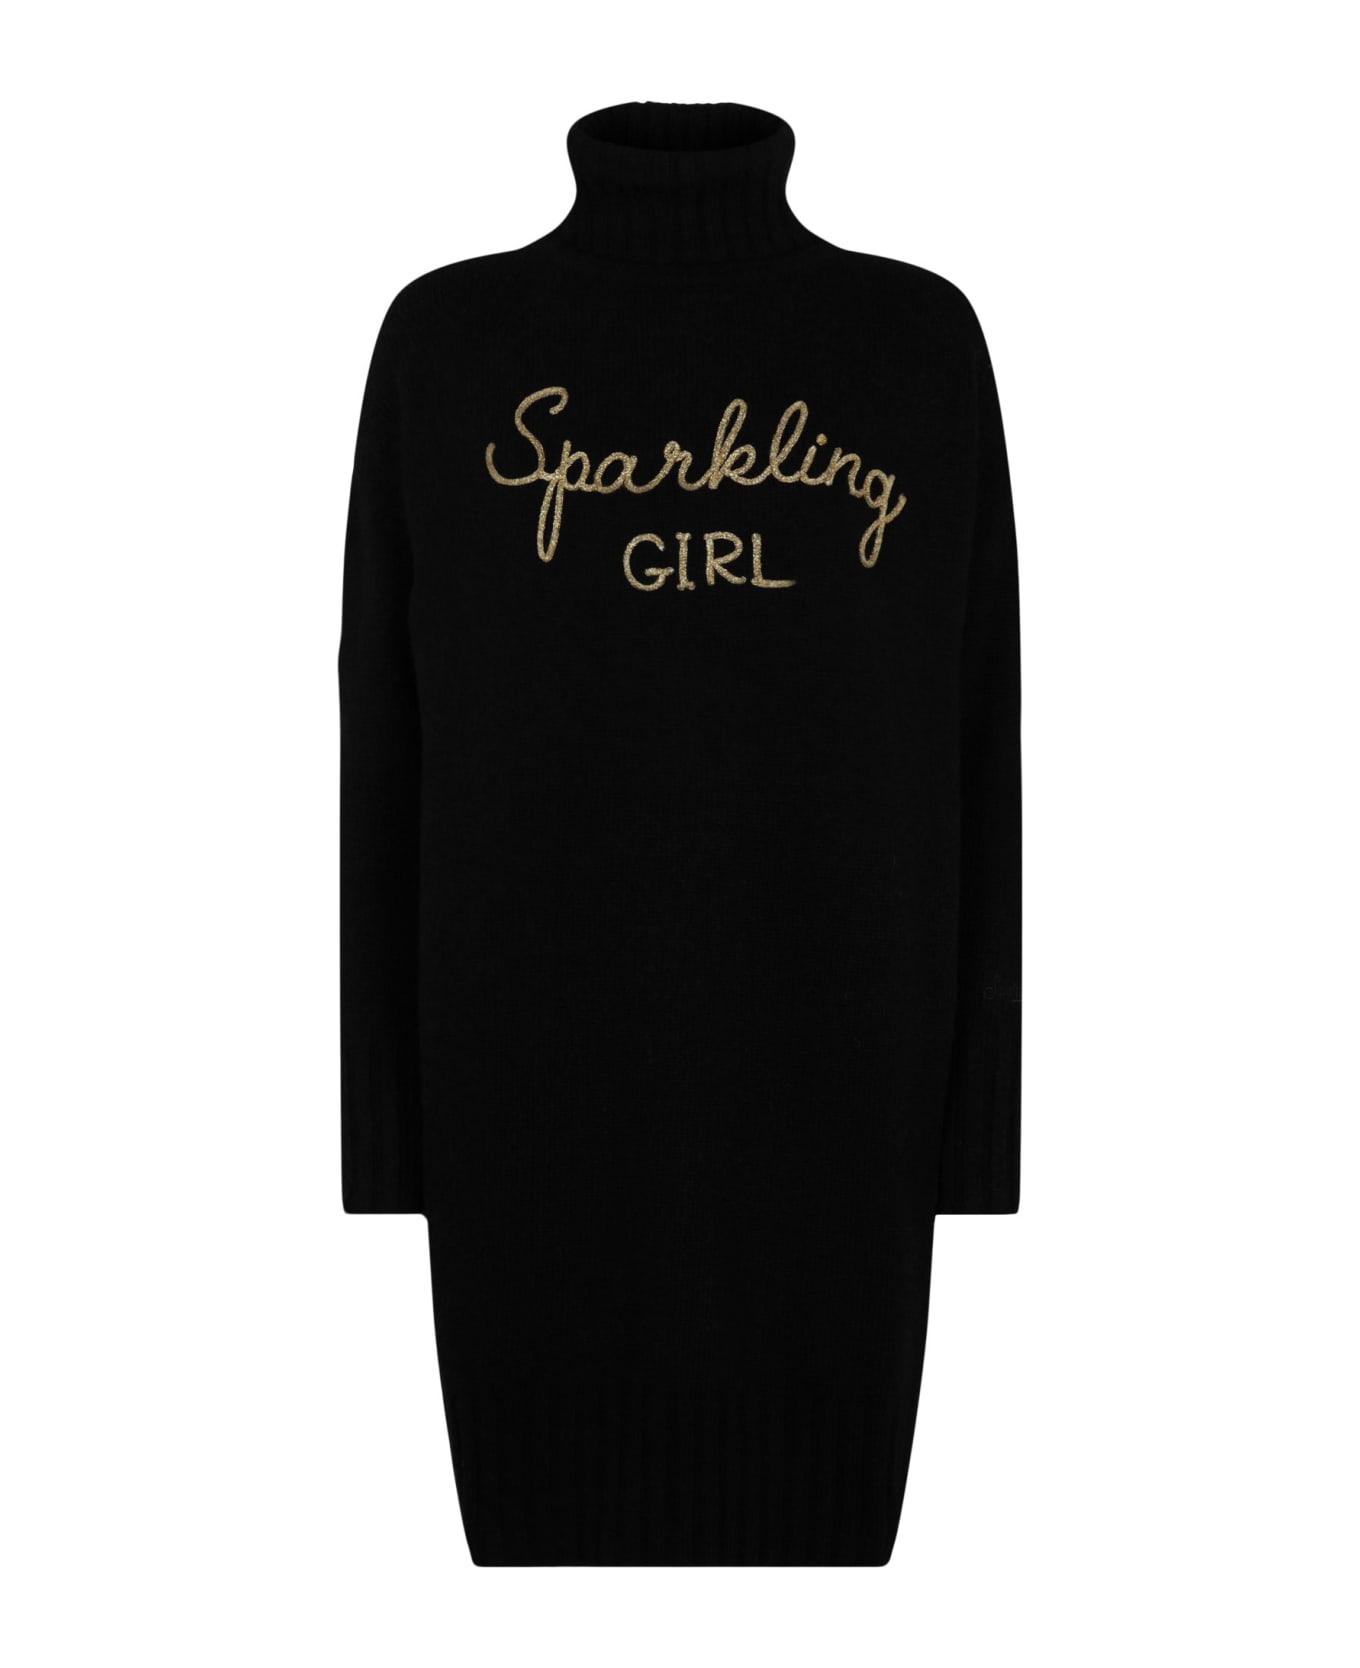 MC2 Saint Barth Woman Knit Dress With Sparkling Girl Embroidery - BLACK